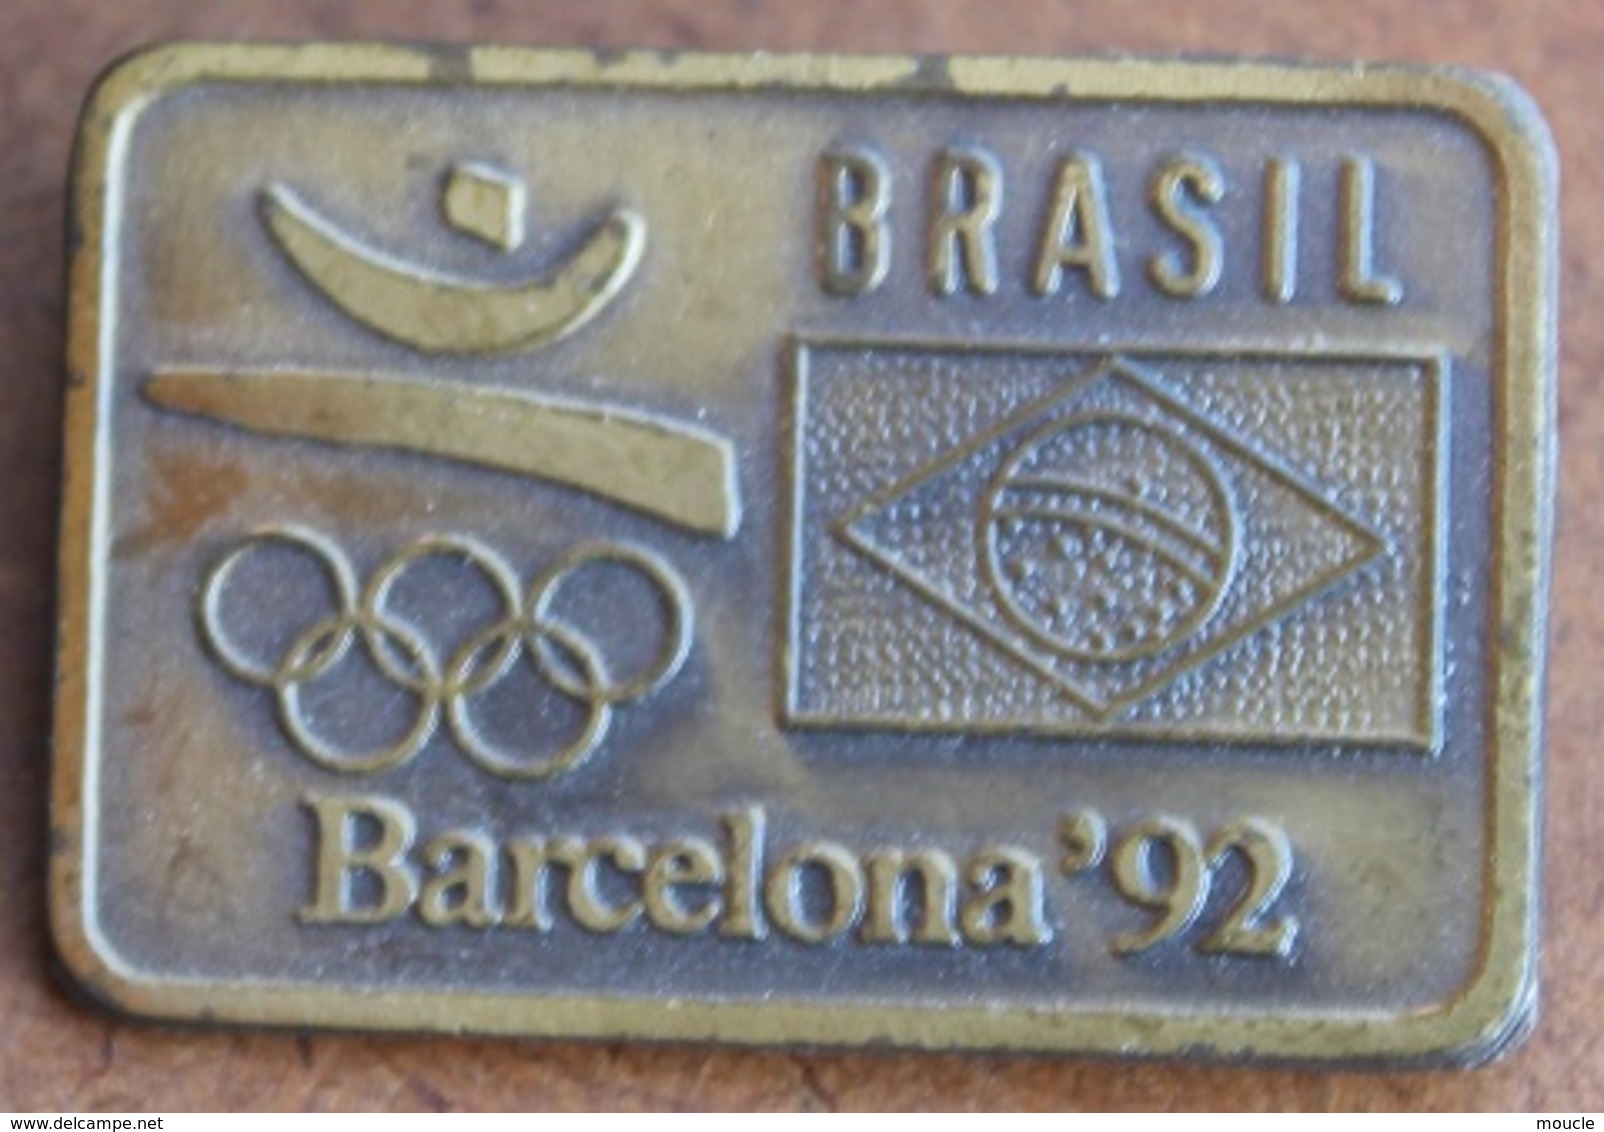 ATTENTION C'EST UNE BROCHE - SPINDEL - BROOCH -  JEUX OLYMPIQUES BARCELONA 92 - BRASIL OLYMPIC TEAM - BRESIL - Juegos Olímpicos